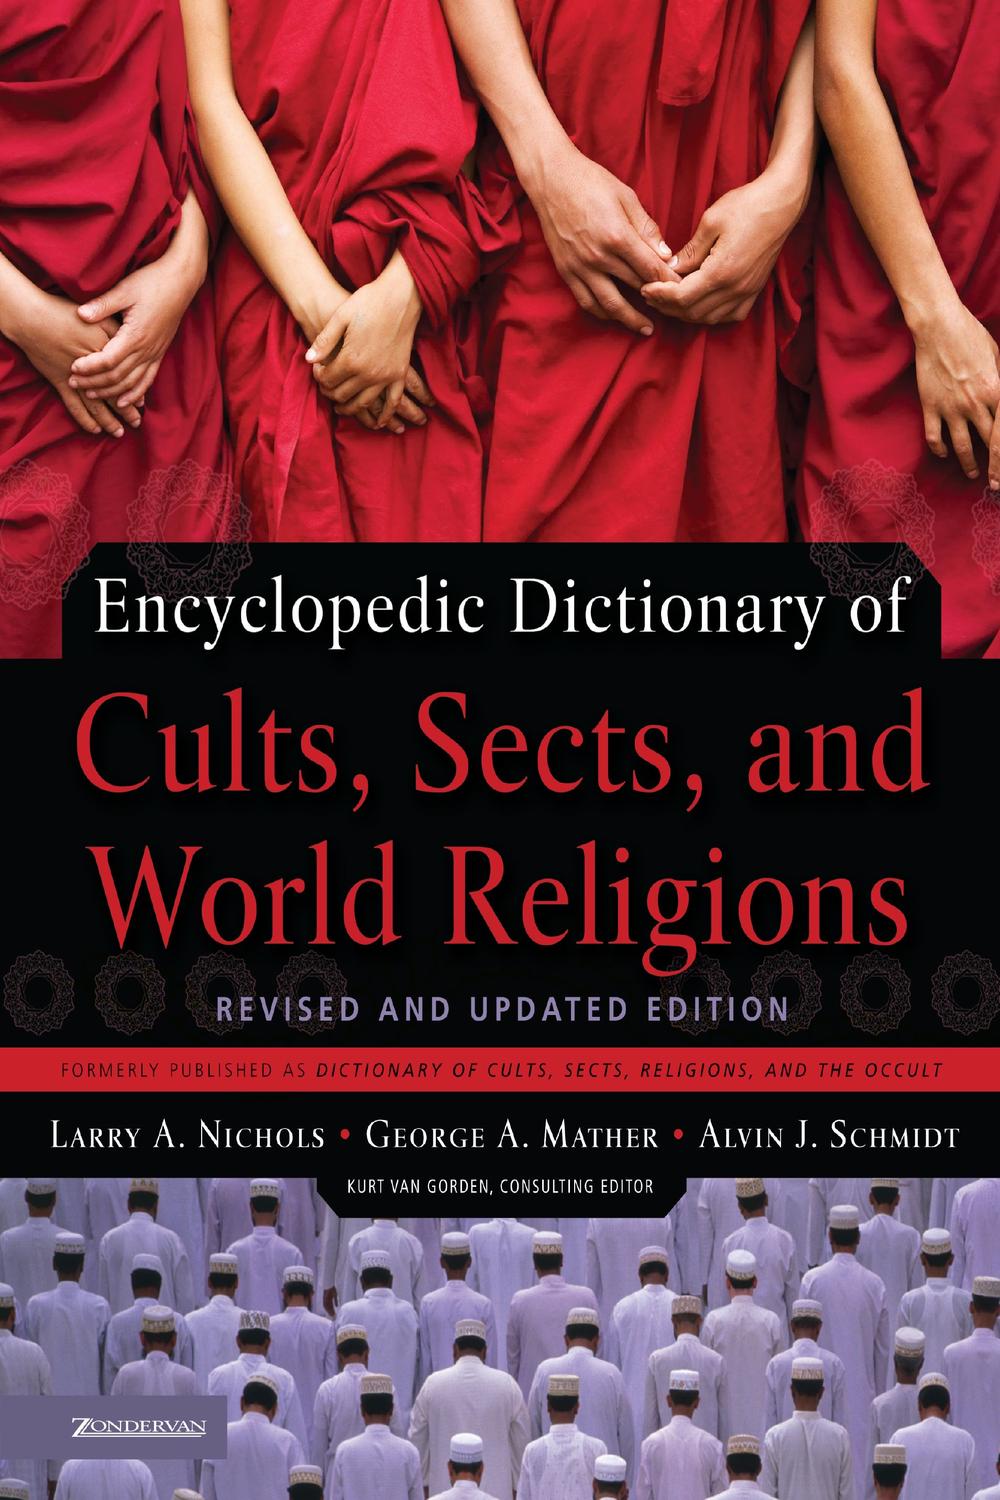 Encyclopedic Dictionary of Cults, Sects, and World Religions - Larry A. Nichols, George Mather, Alvin J. Schmidt